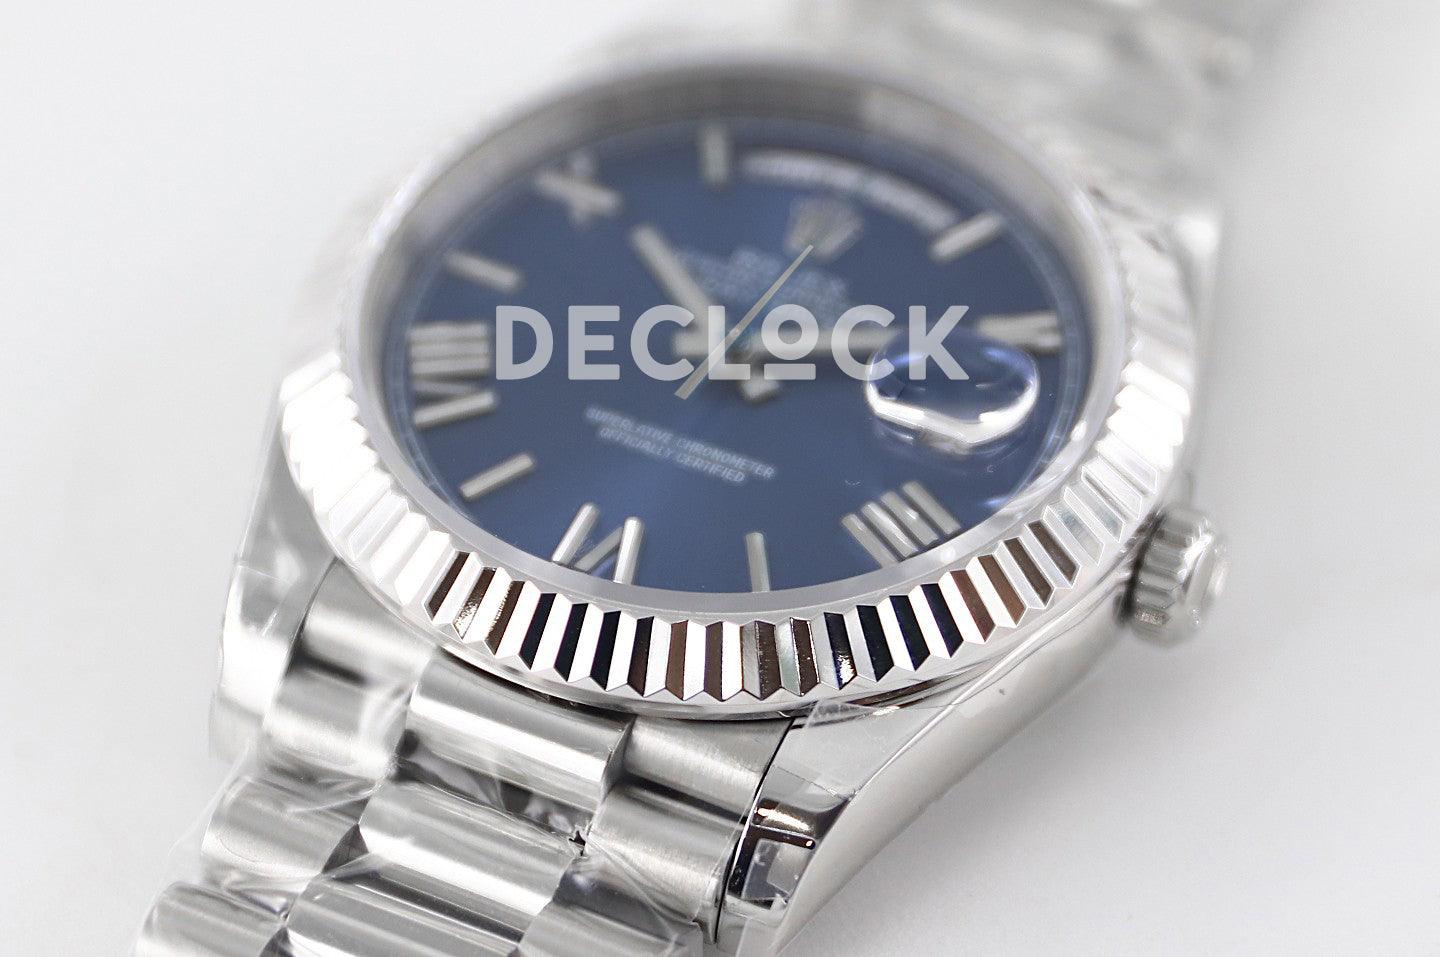 Replica Rolex Day-Date 40 228235 Blue Dial in Yellow Gold with Roman Markers - Replica Watches